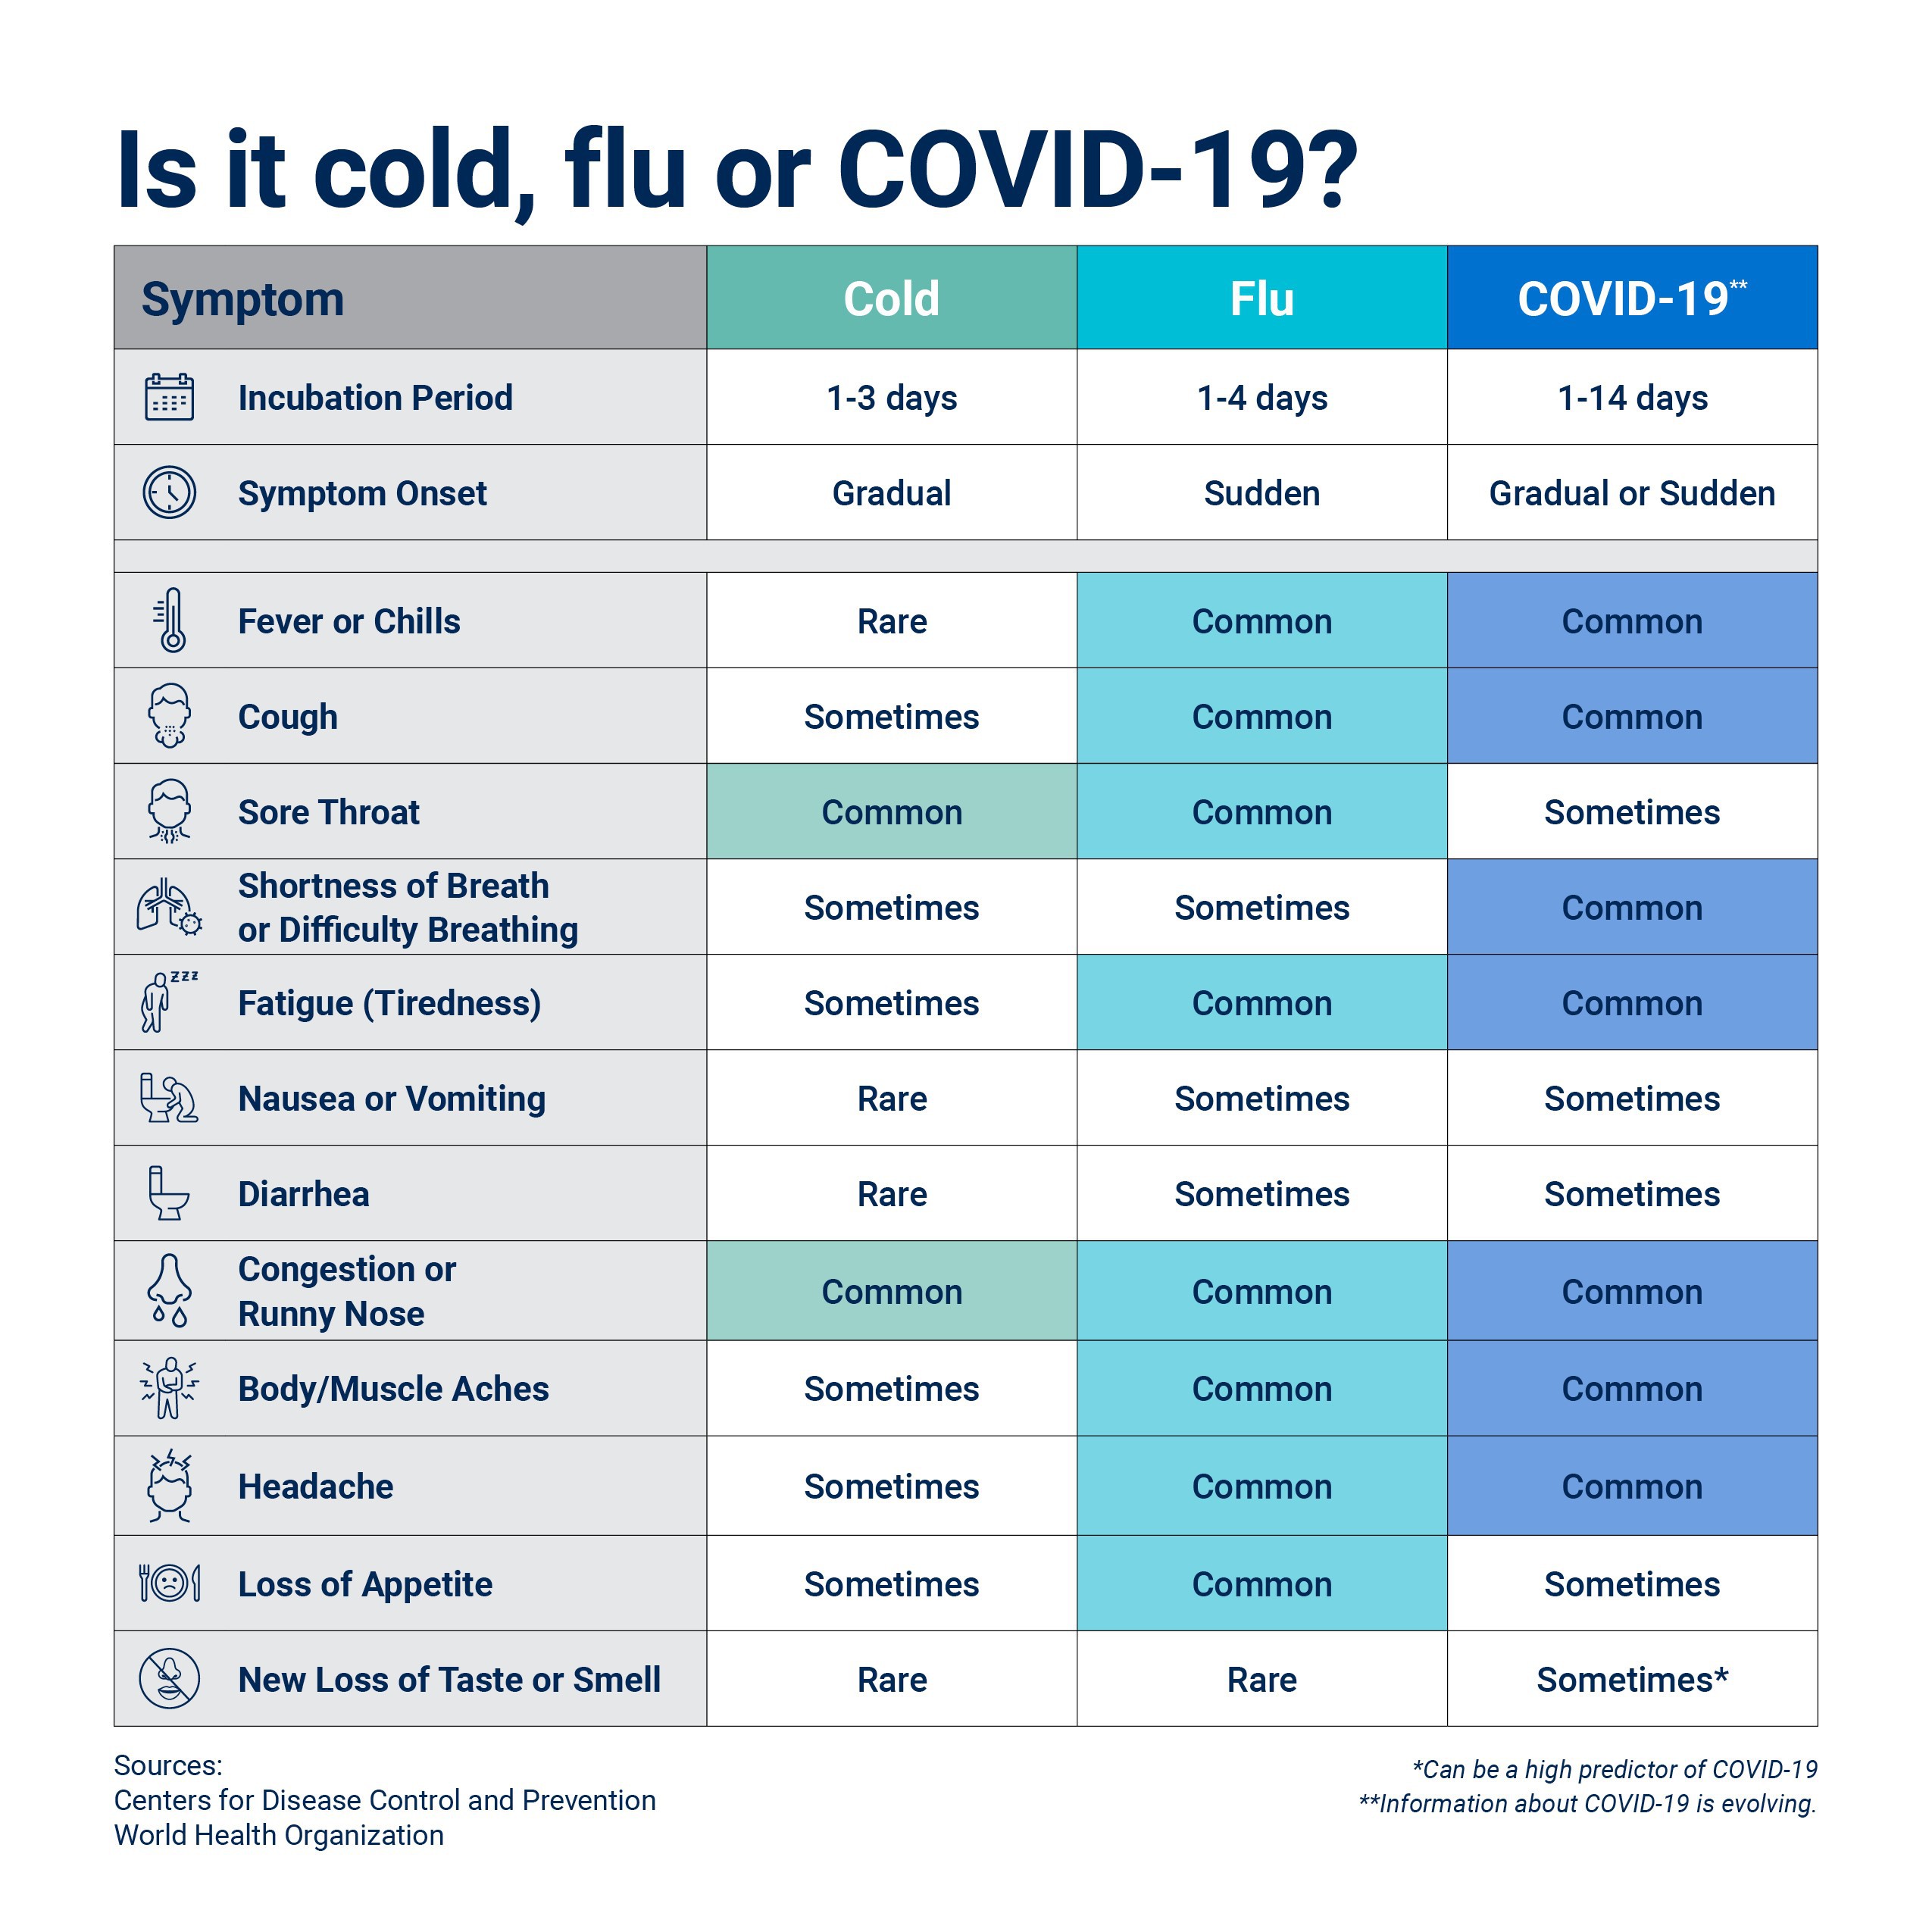 table with information about colds flu and covid-19